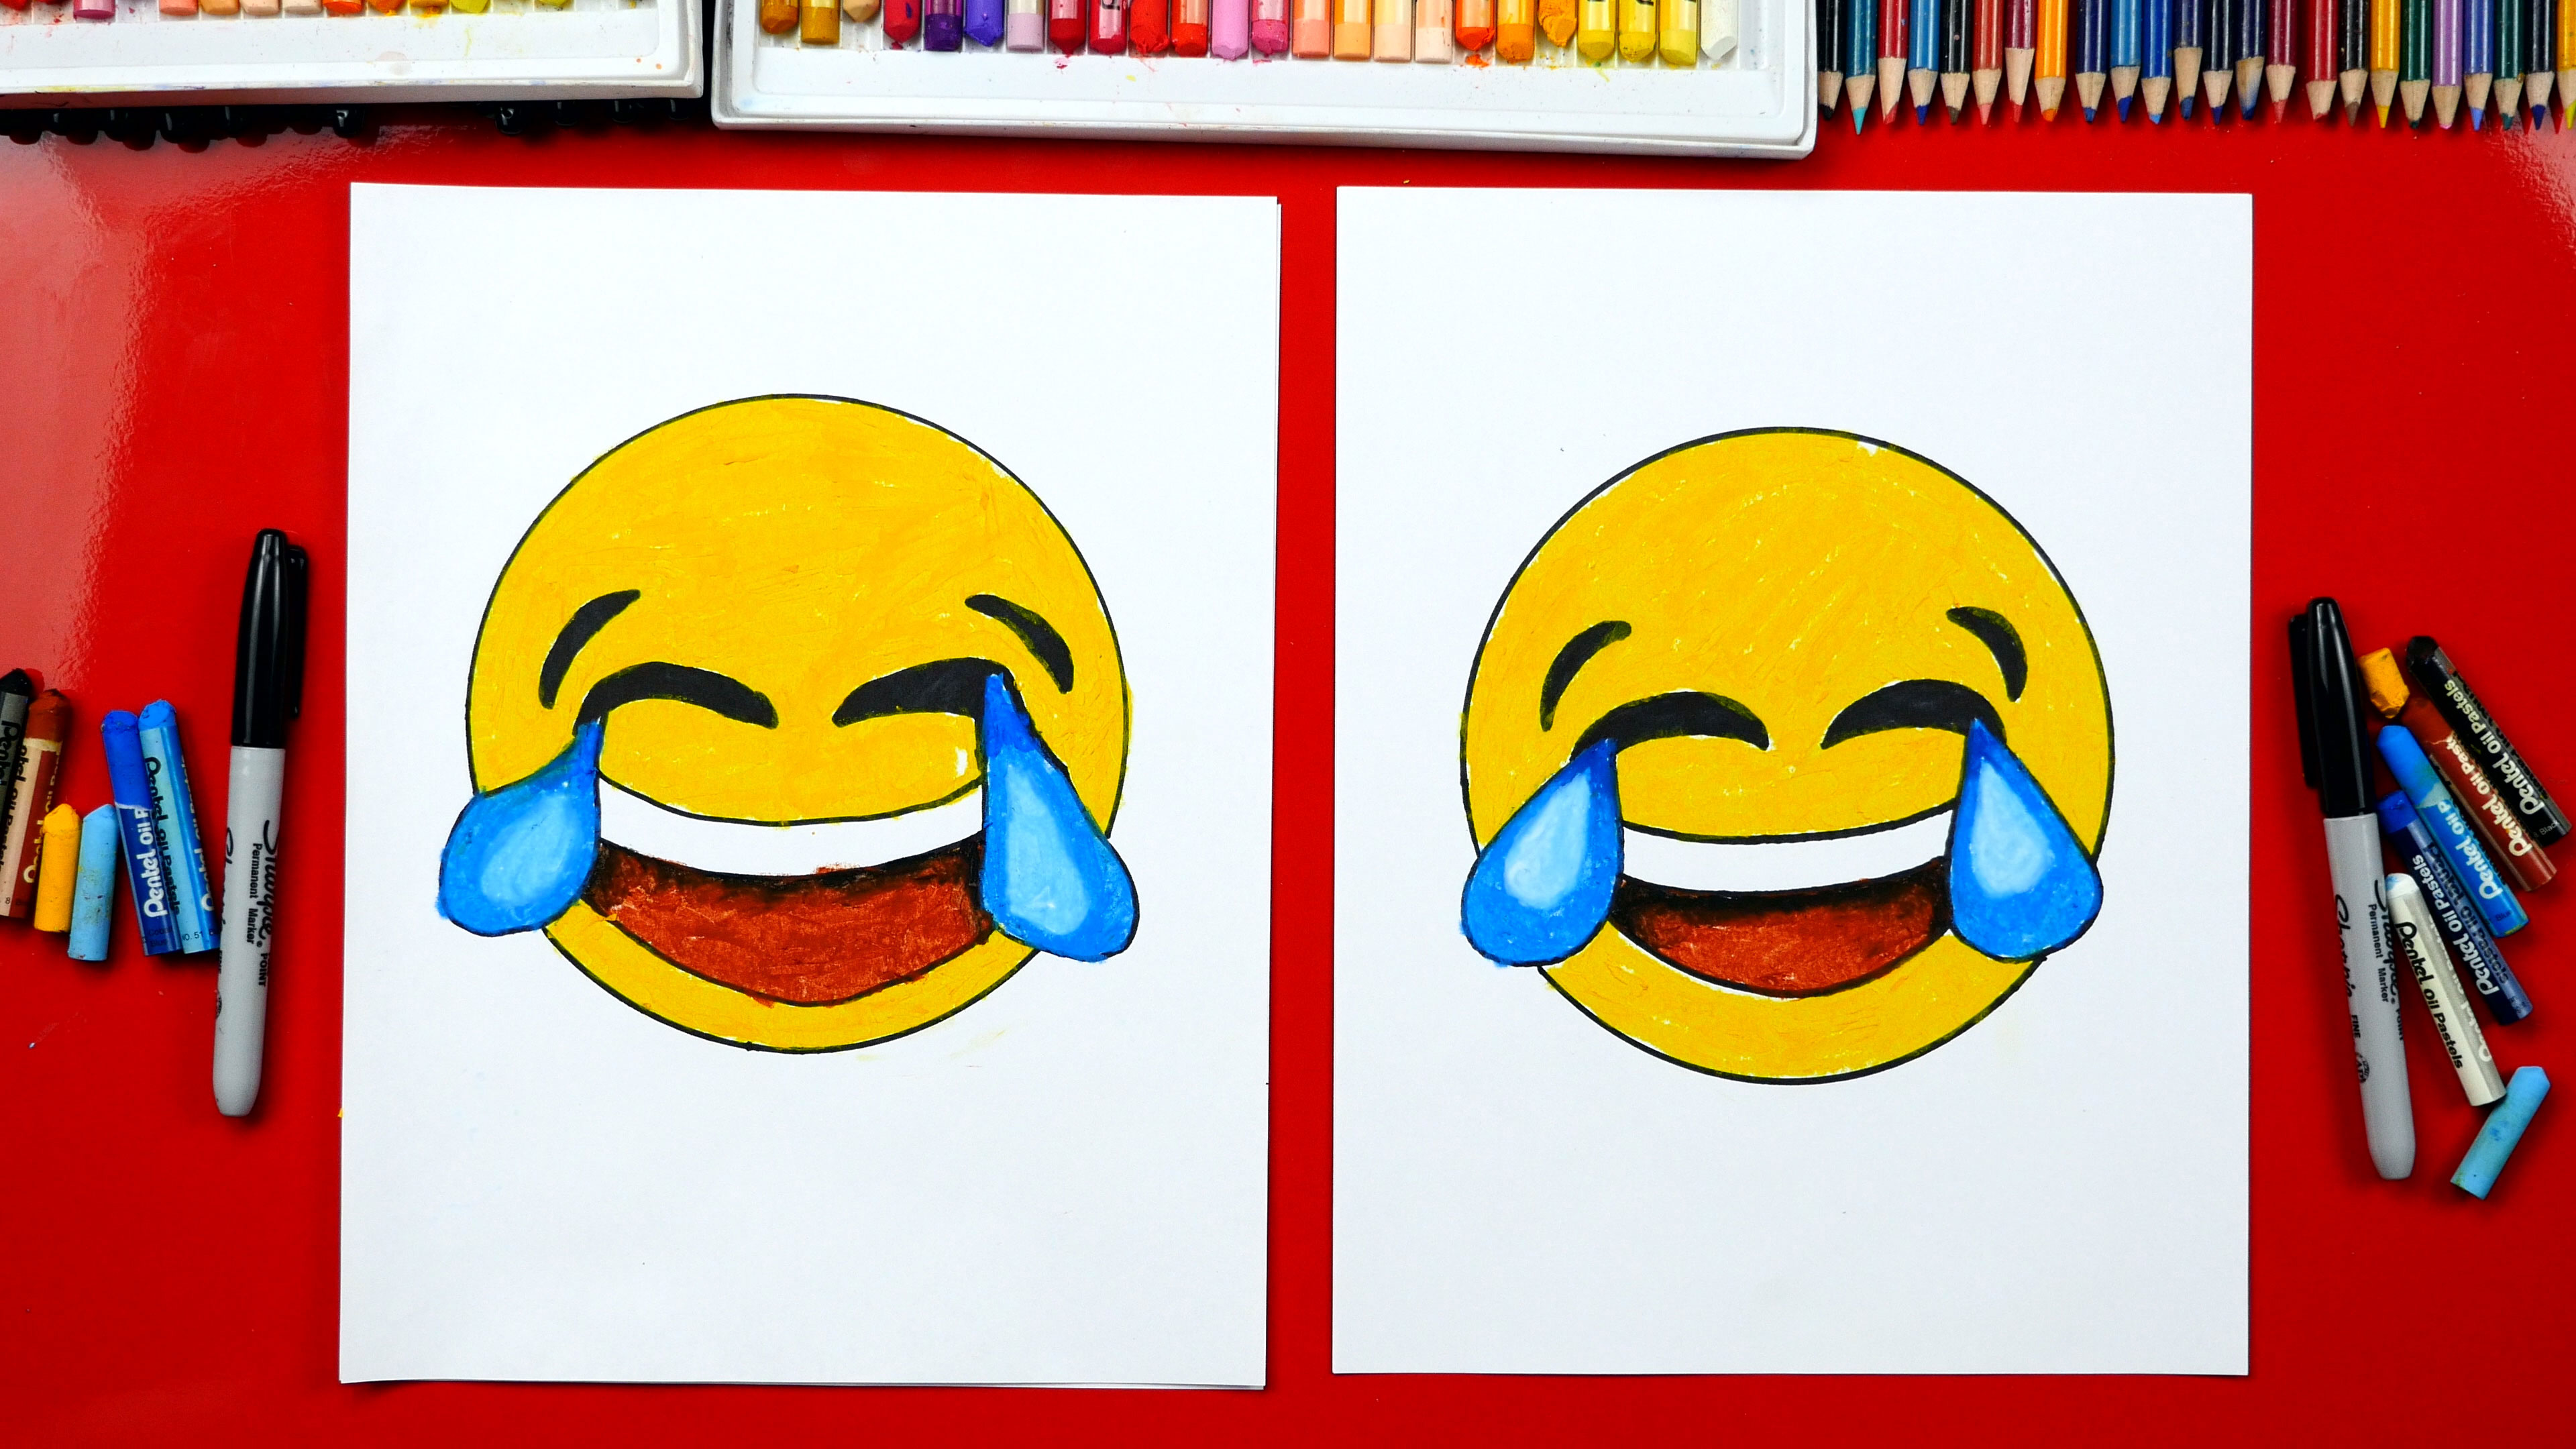 How To Draw A Laughing Emoji - Art For Kids Hub